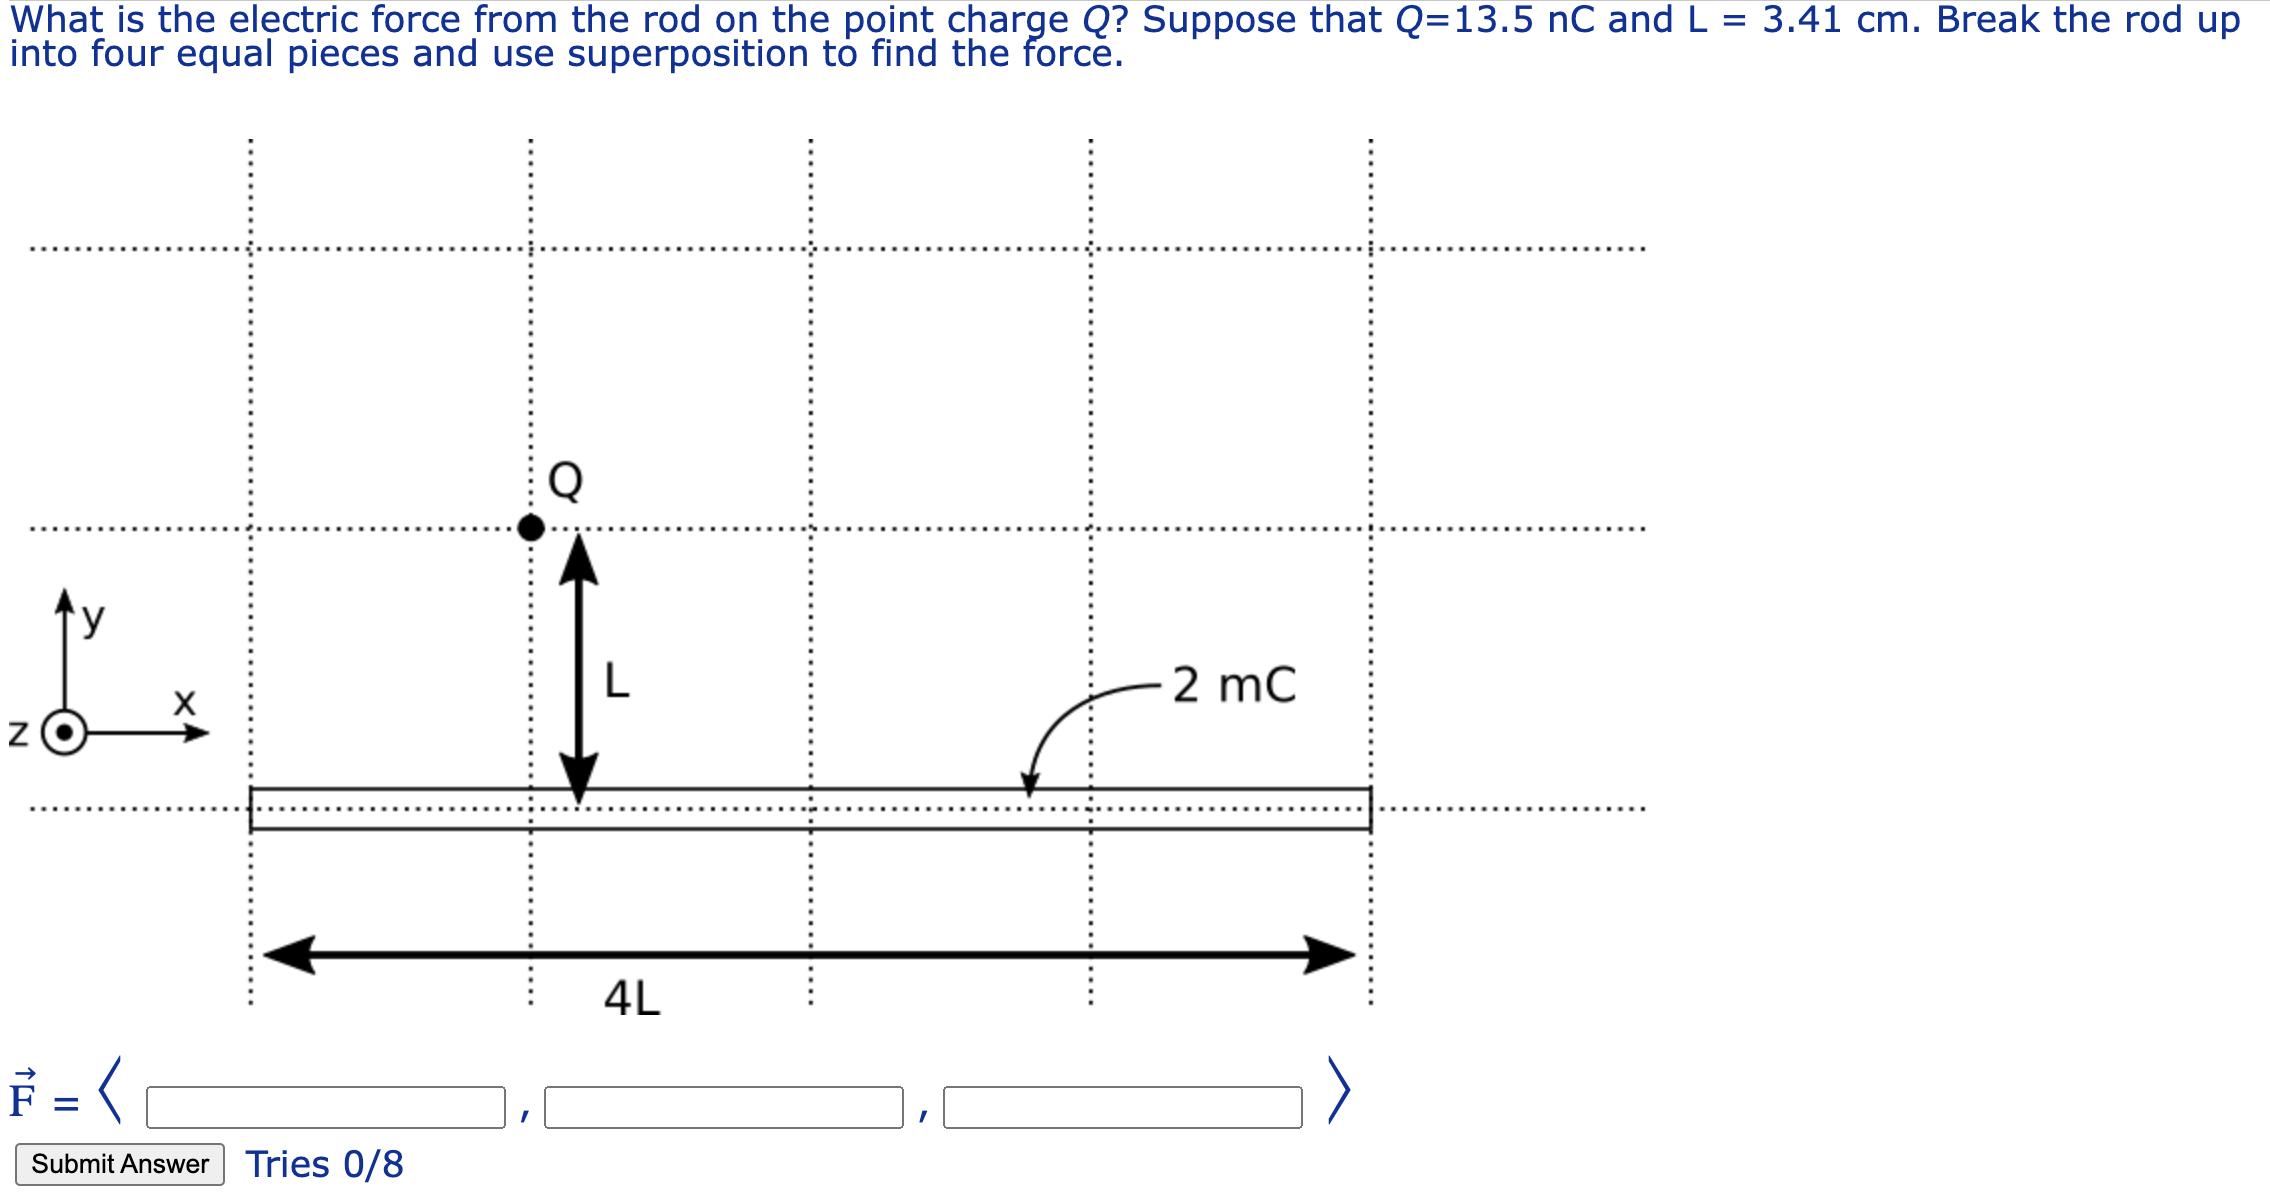 What is the electric force from the rod on the point charge Q? Suppose that Q=13.5 nC and L = 3.41 cm. Break